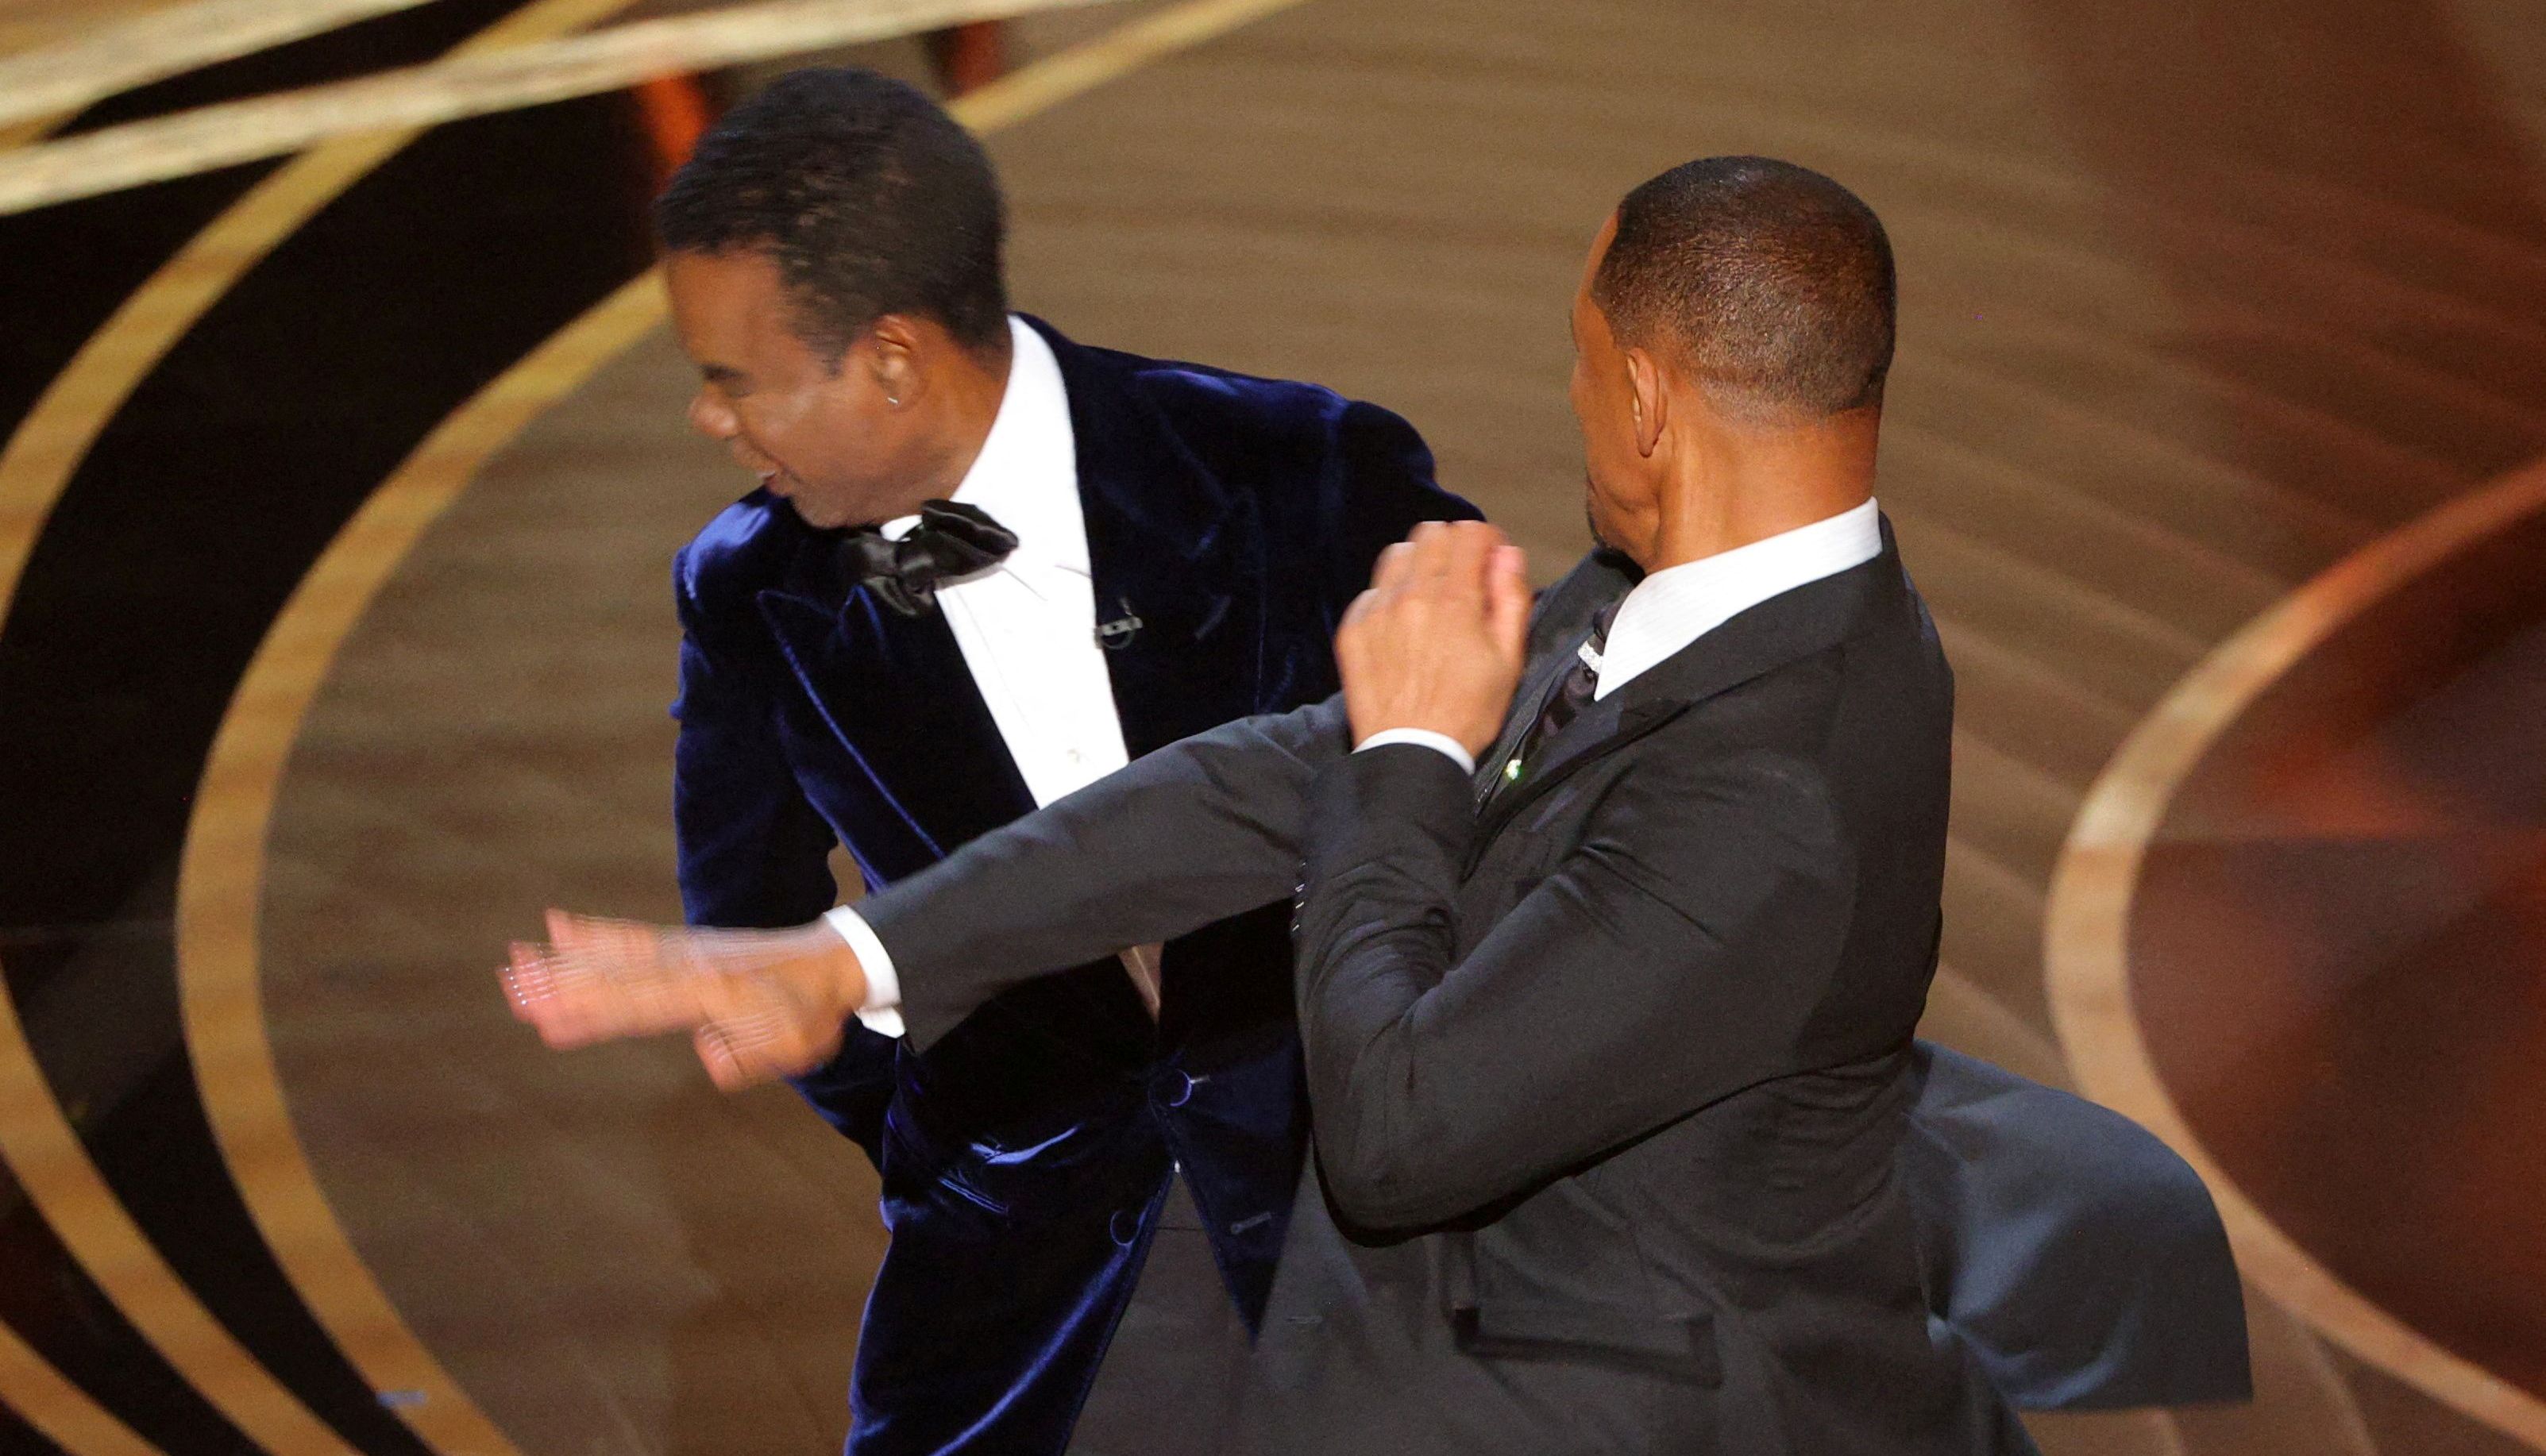 Will Smith hits at Chris Rock during the ceremony